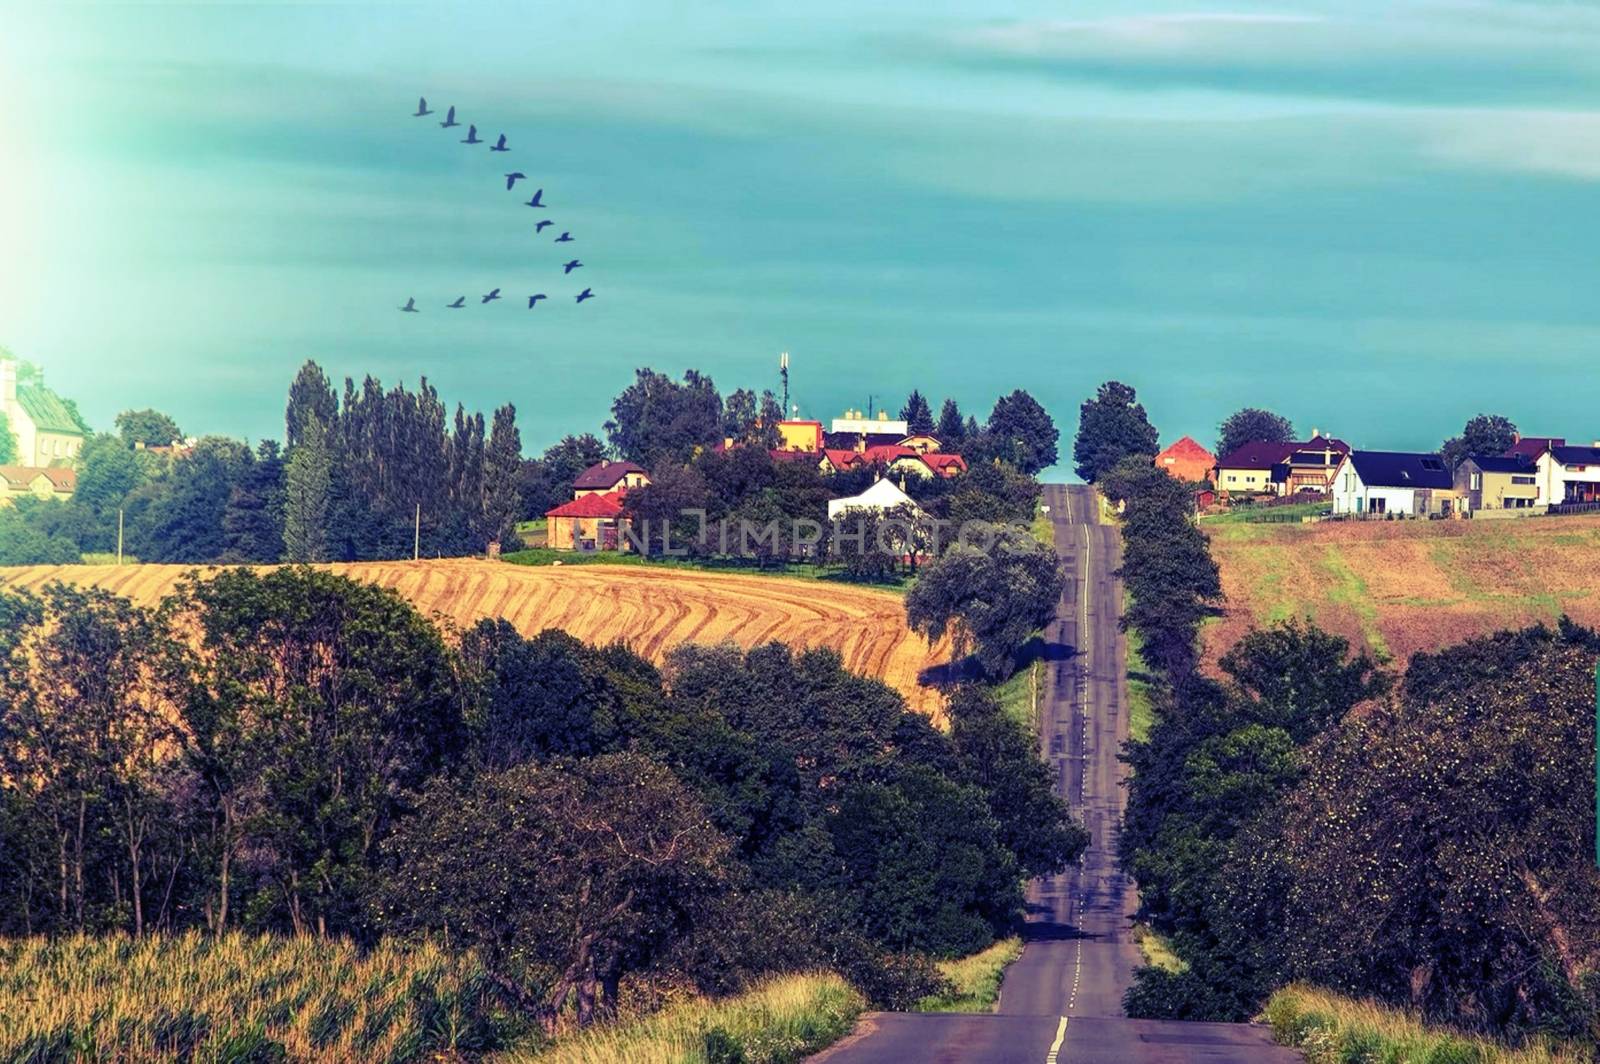 It seems endless road with the houses in the back and the birds by balage941